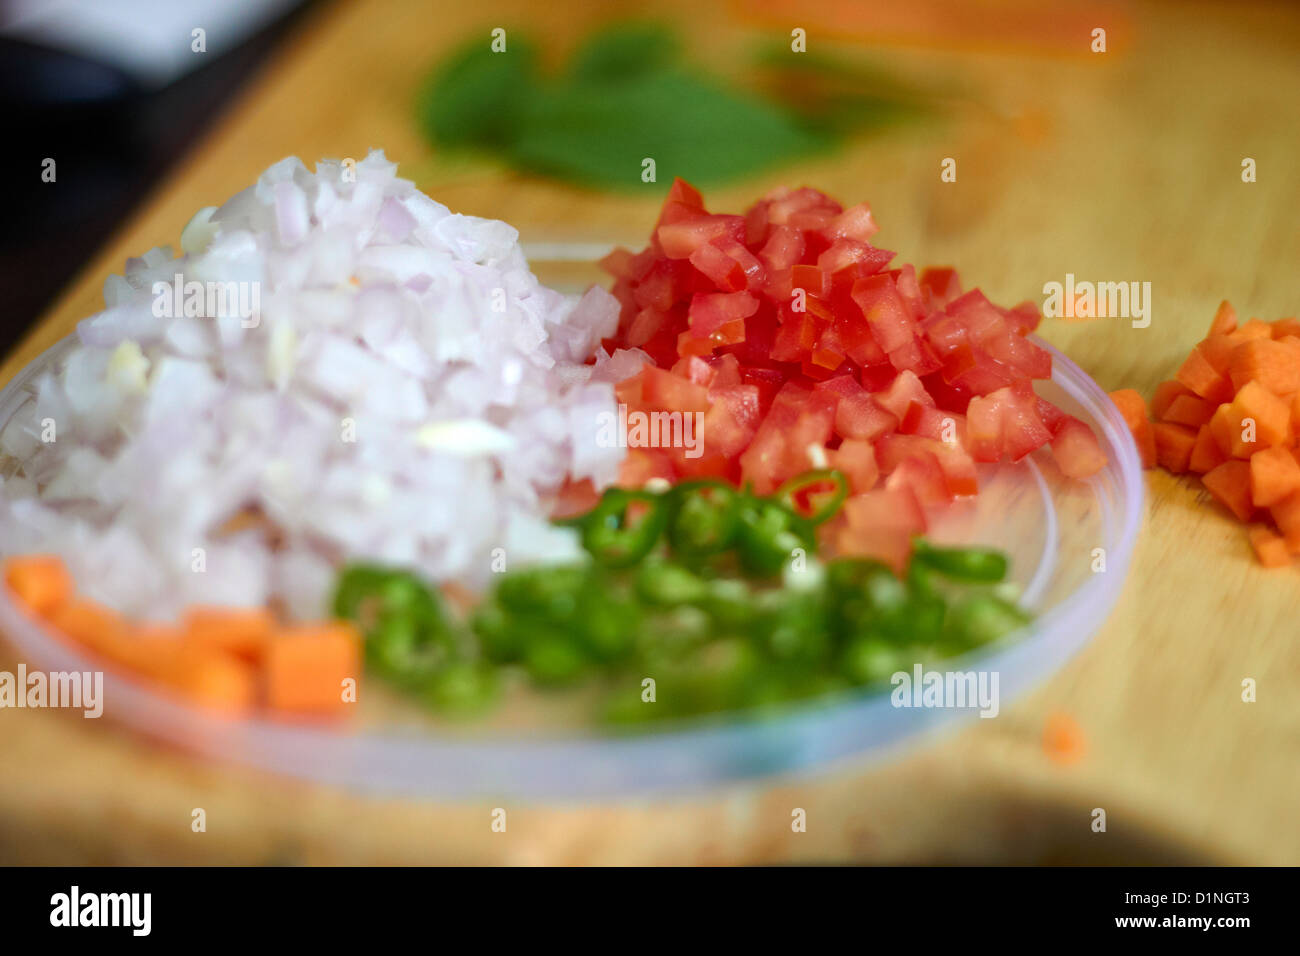 Chopped vegetables. Stock Photo